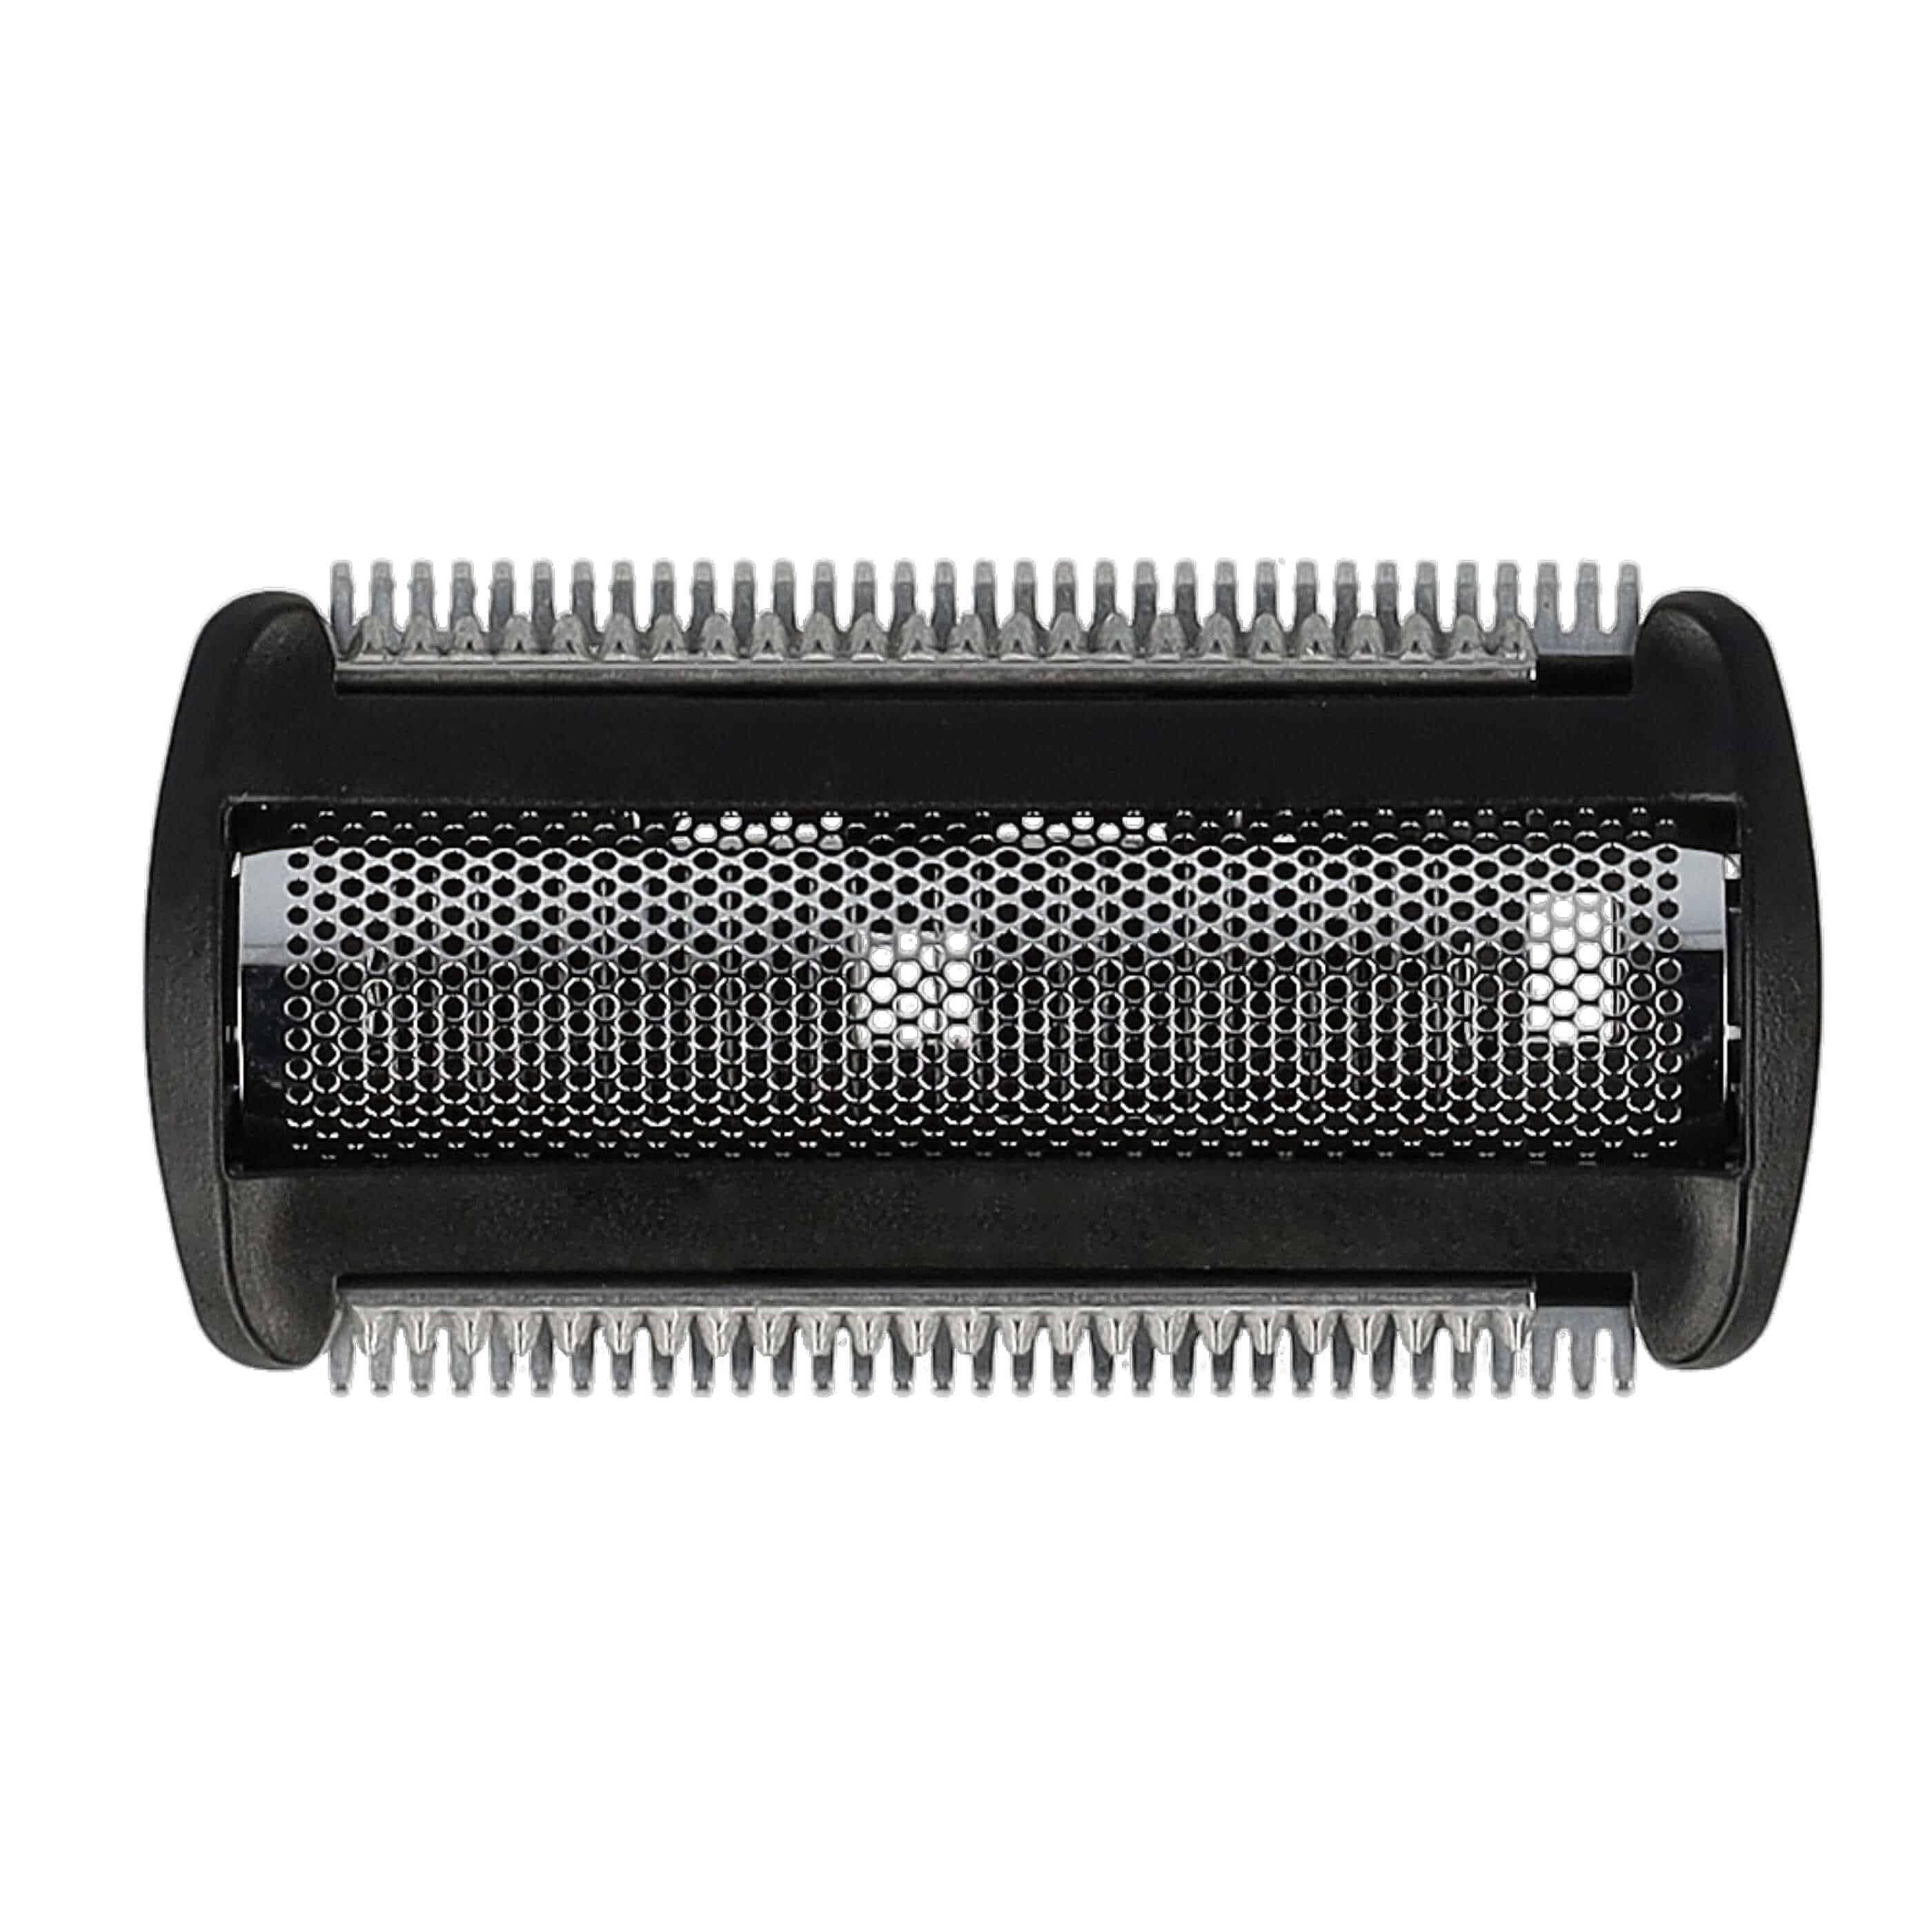 3x Shaving Heads replaces Philips 420303551110, HQ1072/01, HQ1072 for PhilipsElectric Razor, black / silver